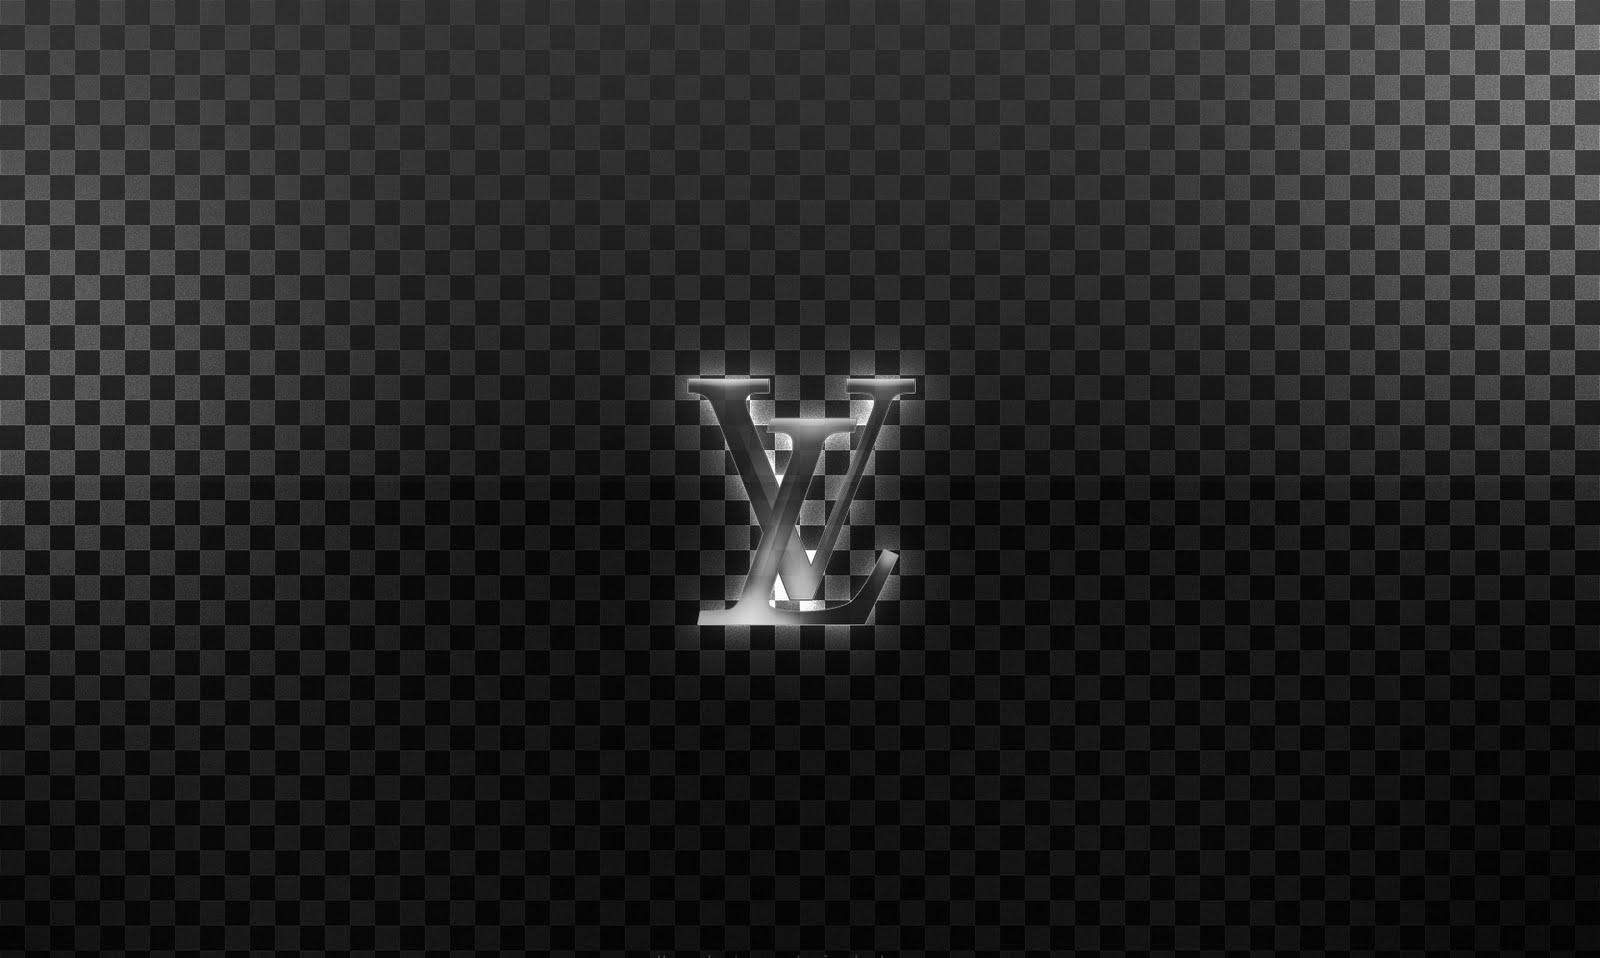 Louis Vuitton Black and White Wallpapers - Top Free Louis Vuitton Black and White  Backgrounds - WallpaperAccess